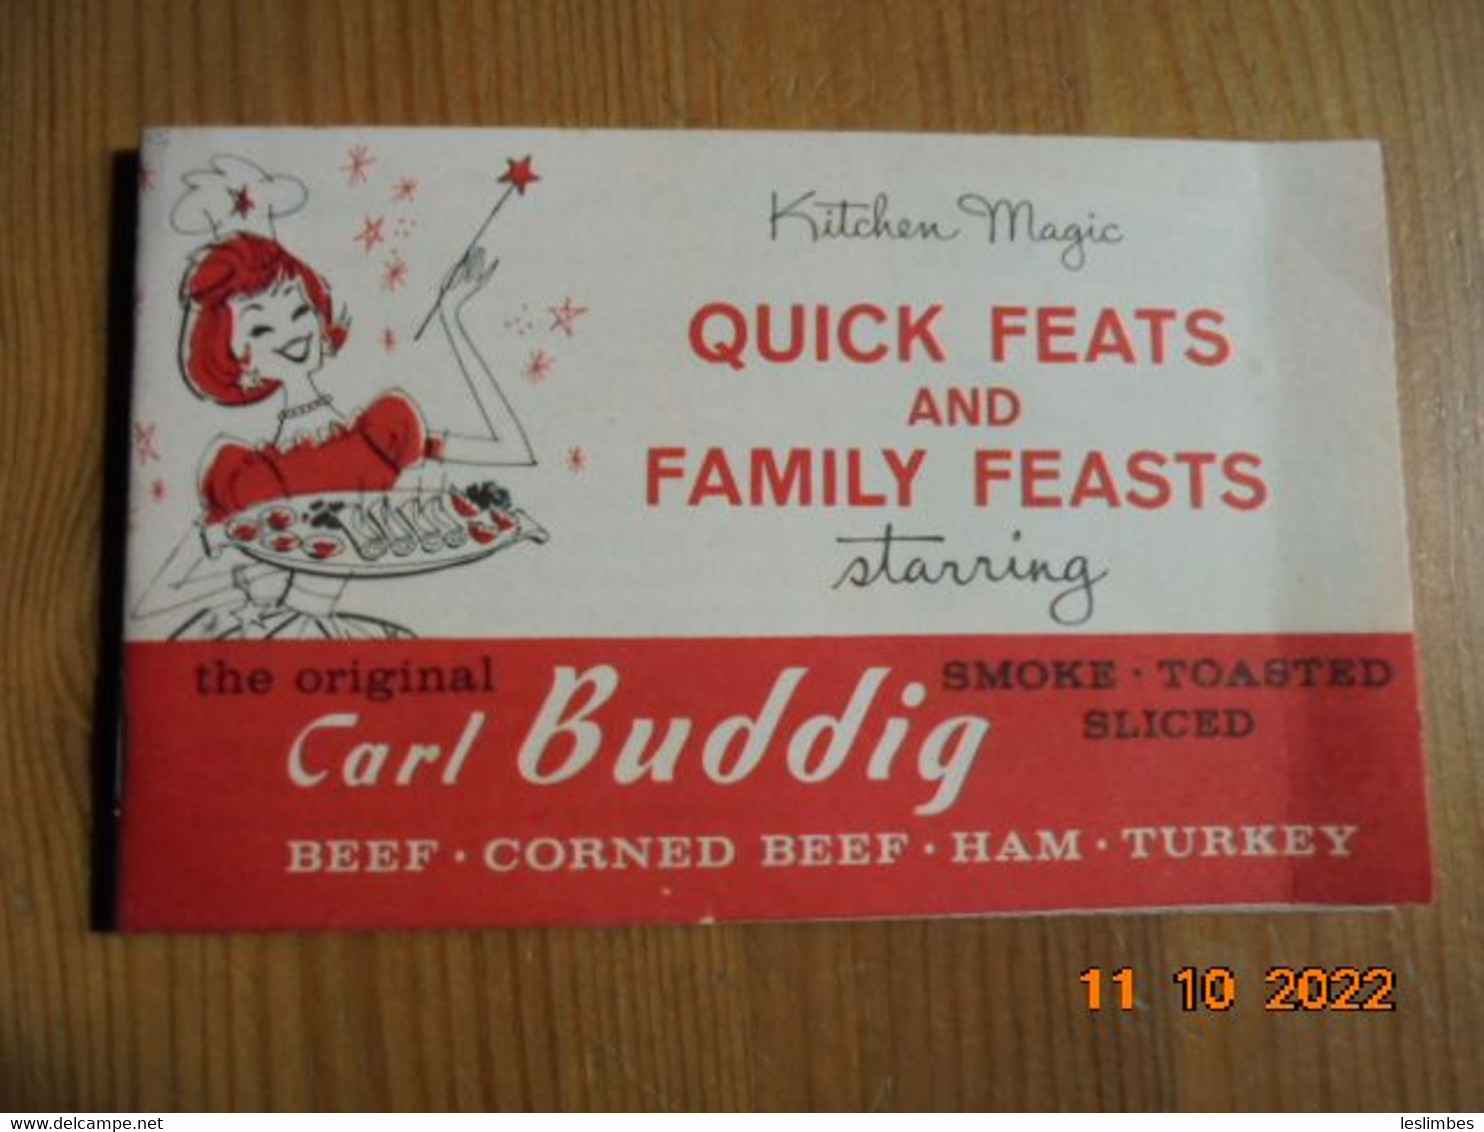 Kitchen Magic Quick Feats And Family Feasts Starring The Original Carl Buddig Smoke Toasted Sliced Beef, Corned Beef.... - Nordamerika